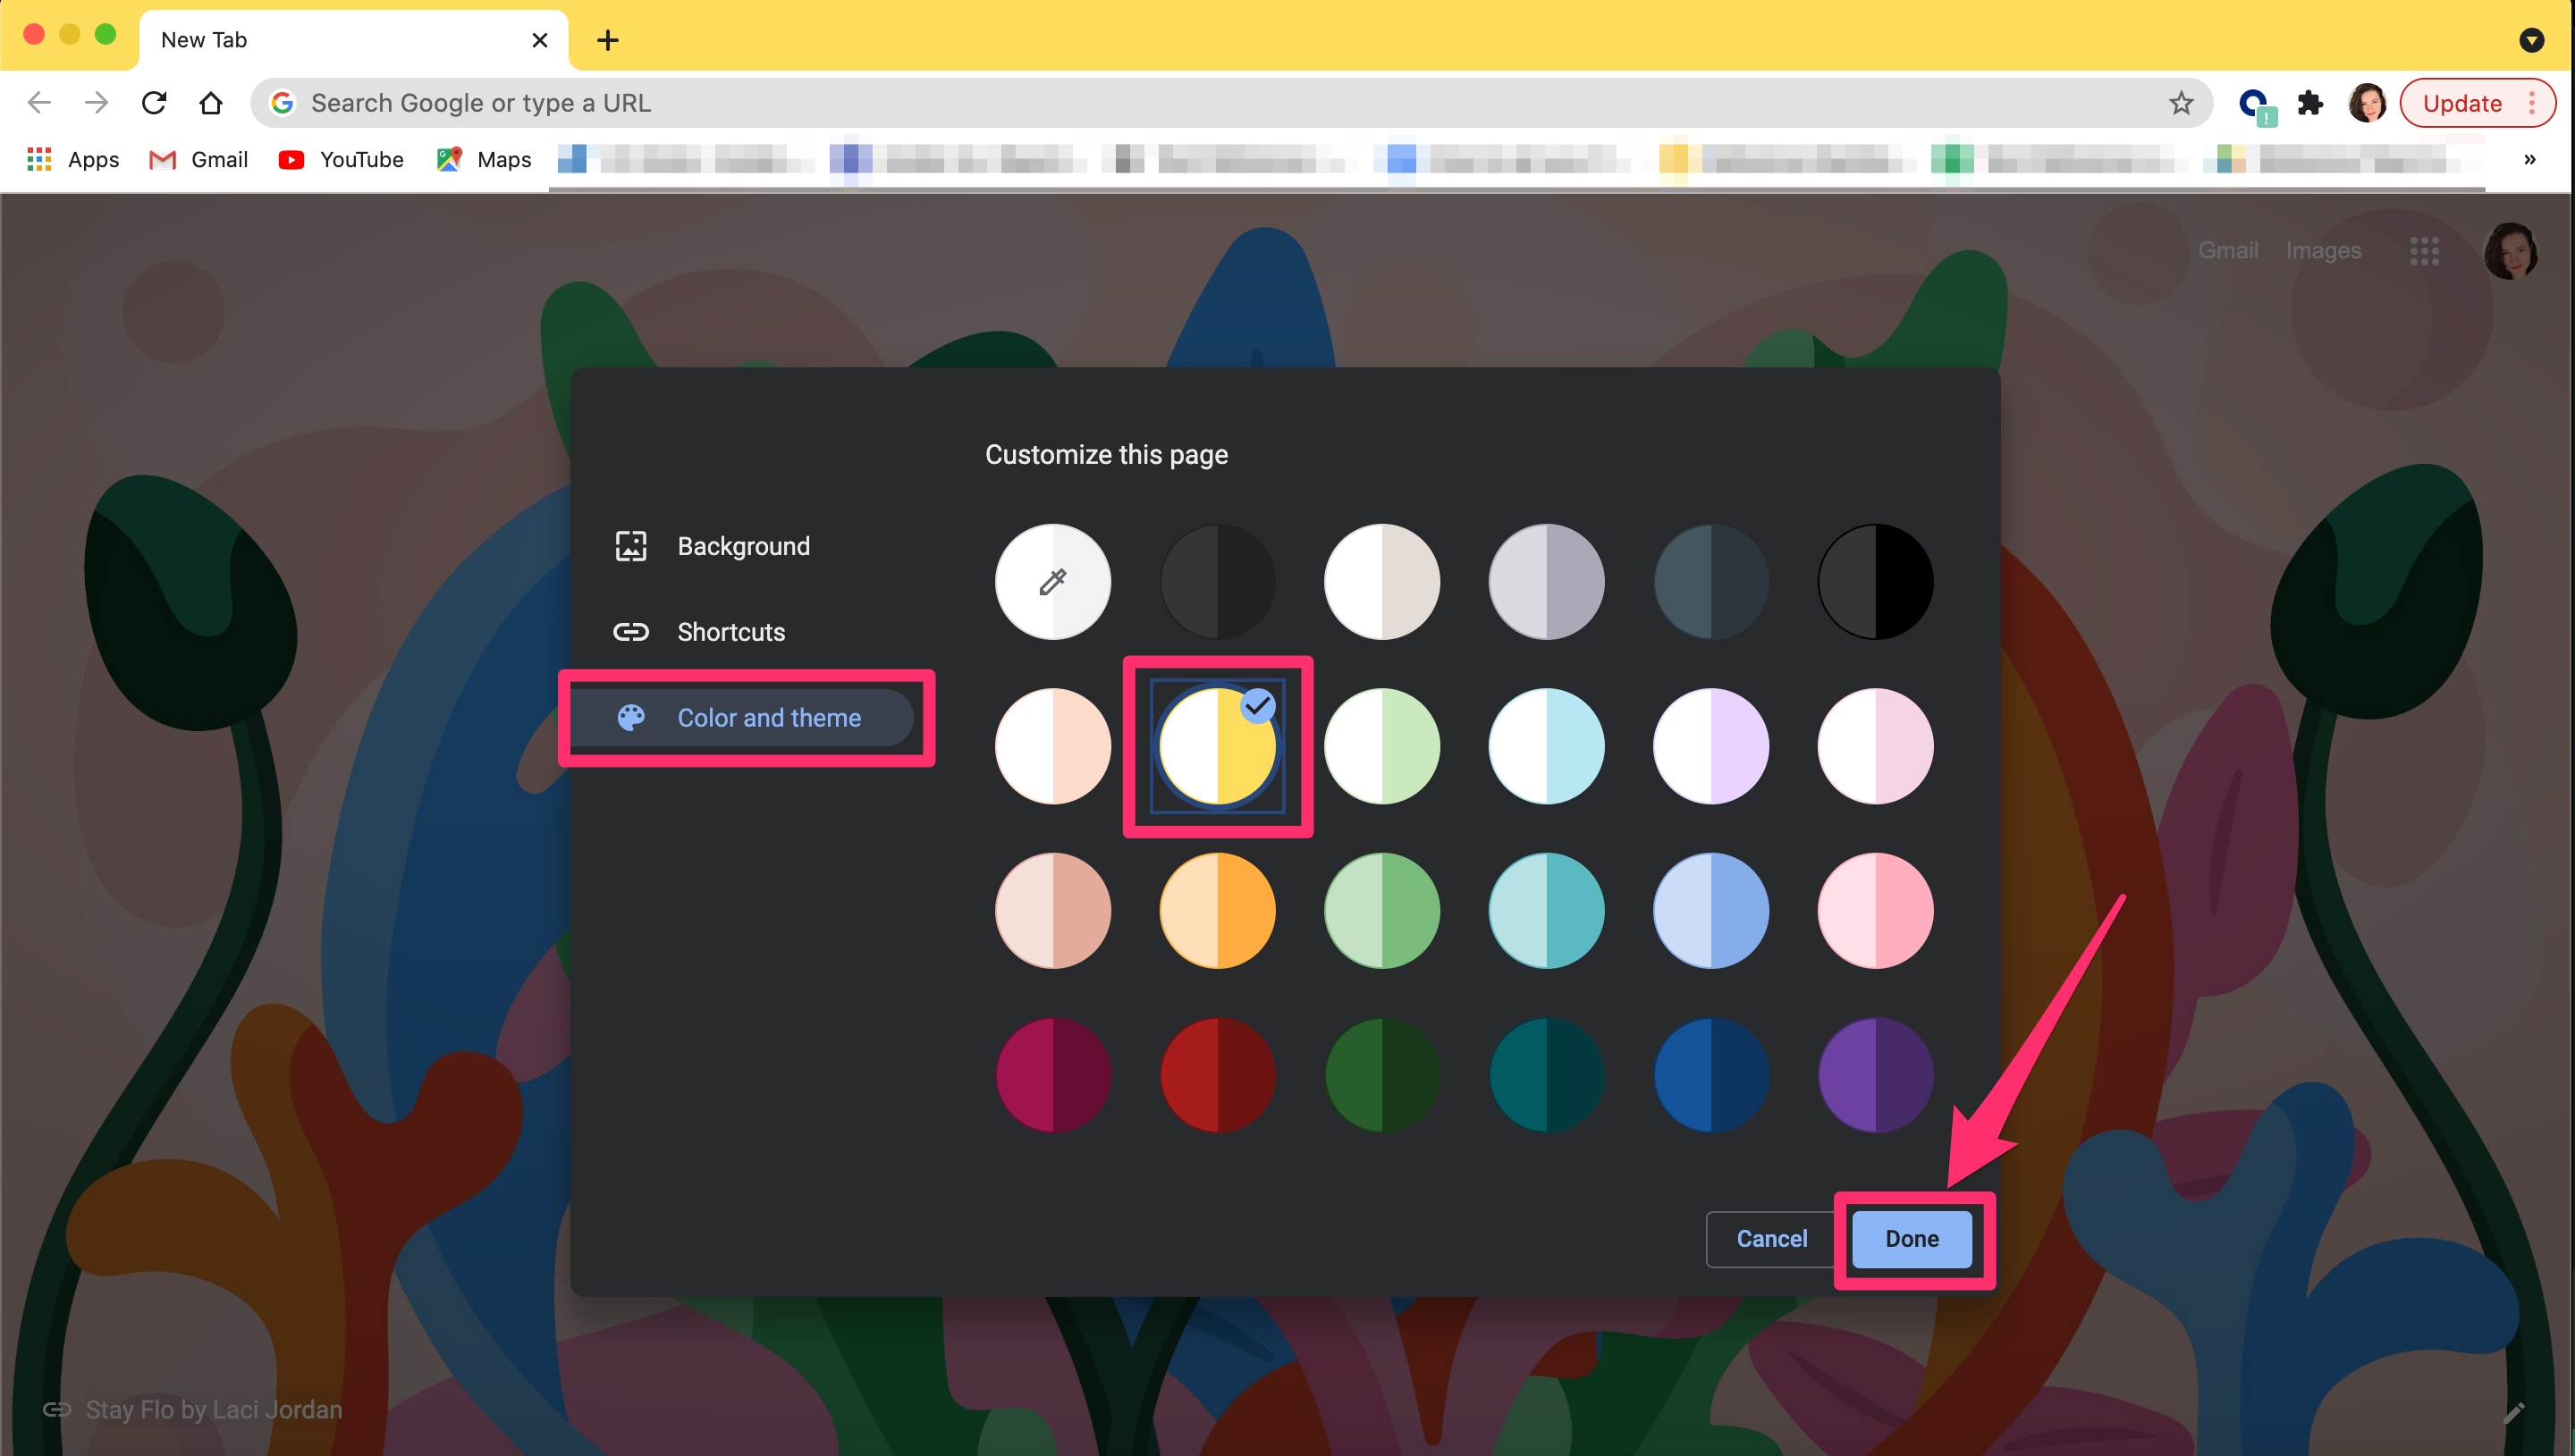 Google Chrome colors and themes pop-up